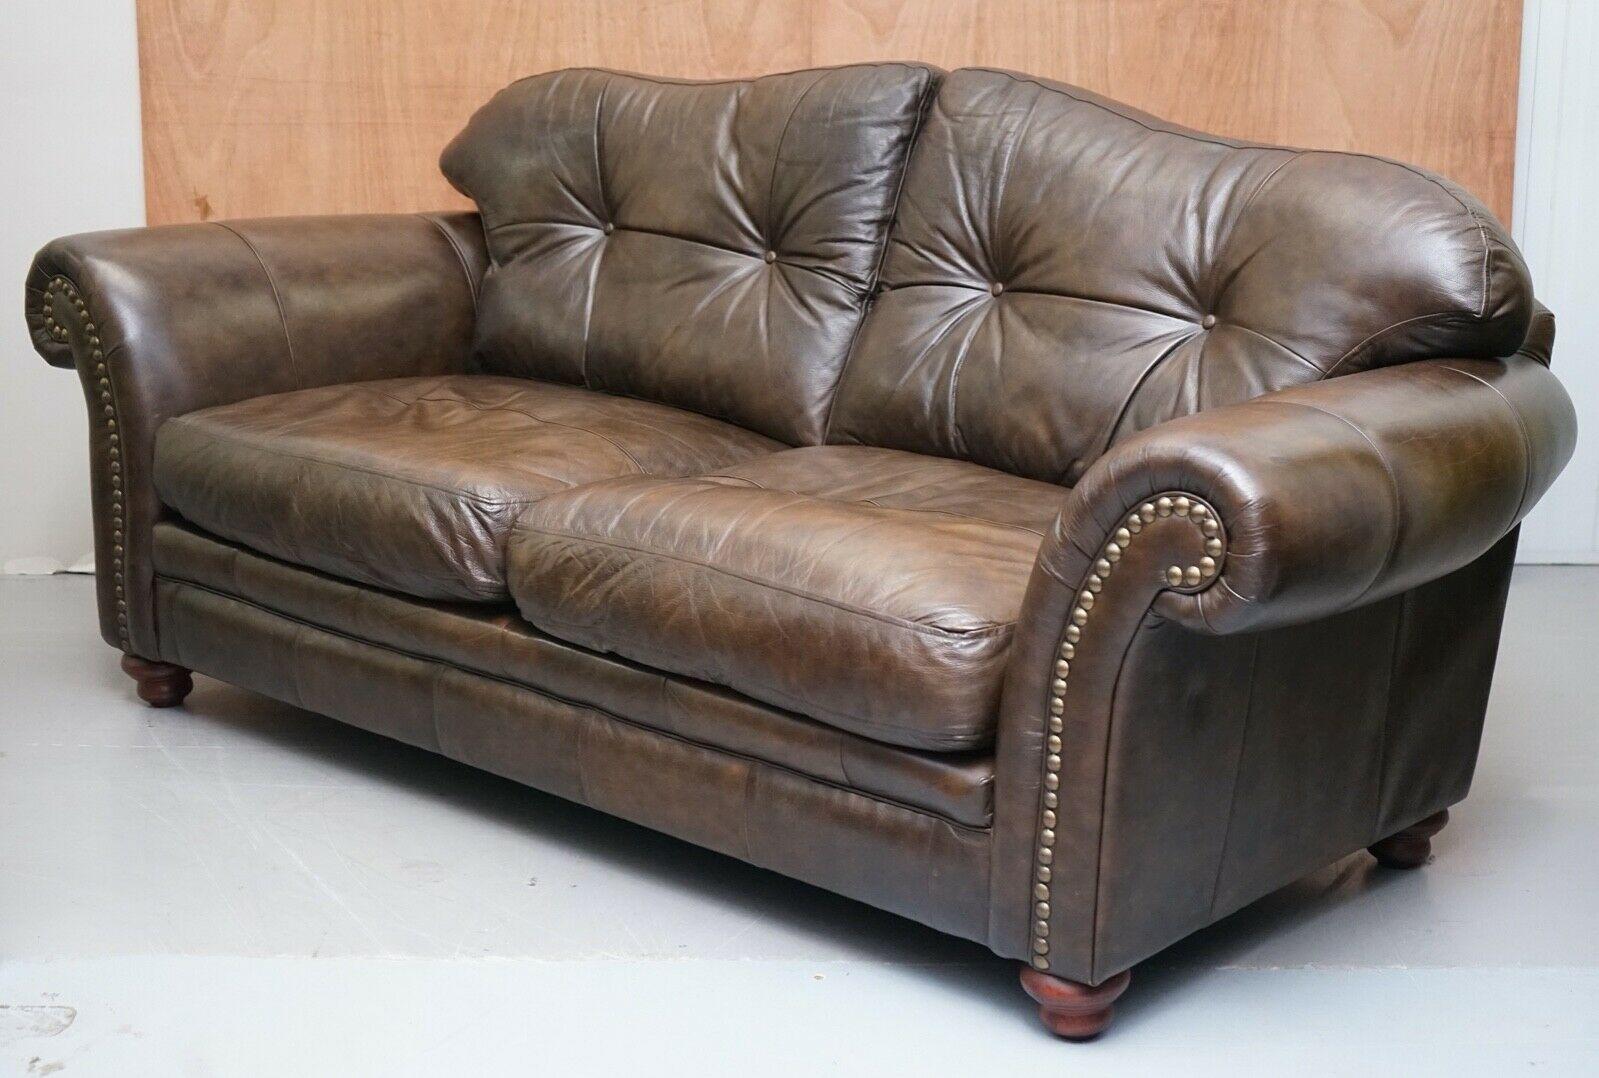 We are delighted to sell this Tetrad brown leather sofa, in a very good condition all over.

We have deep cleaned, waxed and polished the sofa.

Please view our pictures as they form part of the description.



Dimensions 

Height - 88cm